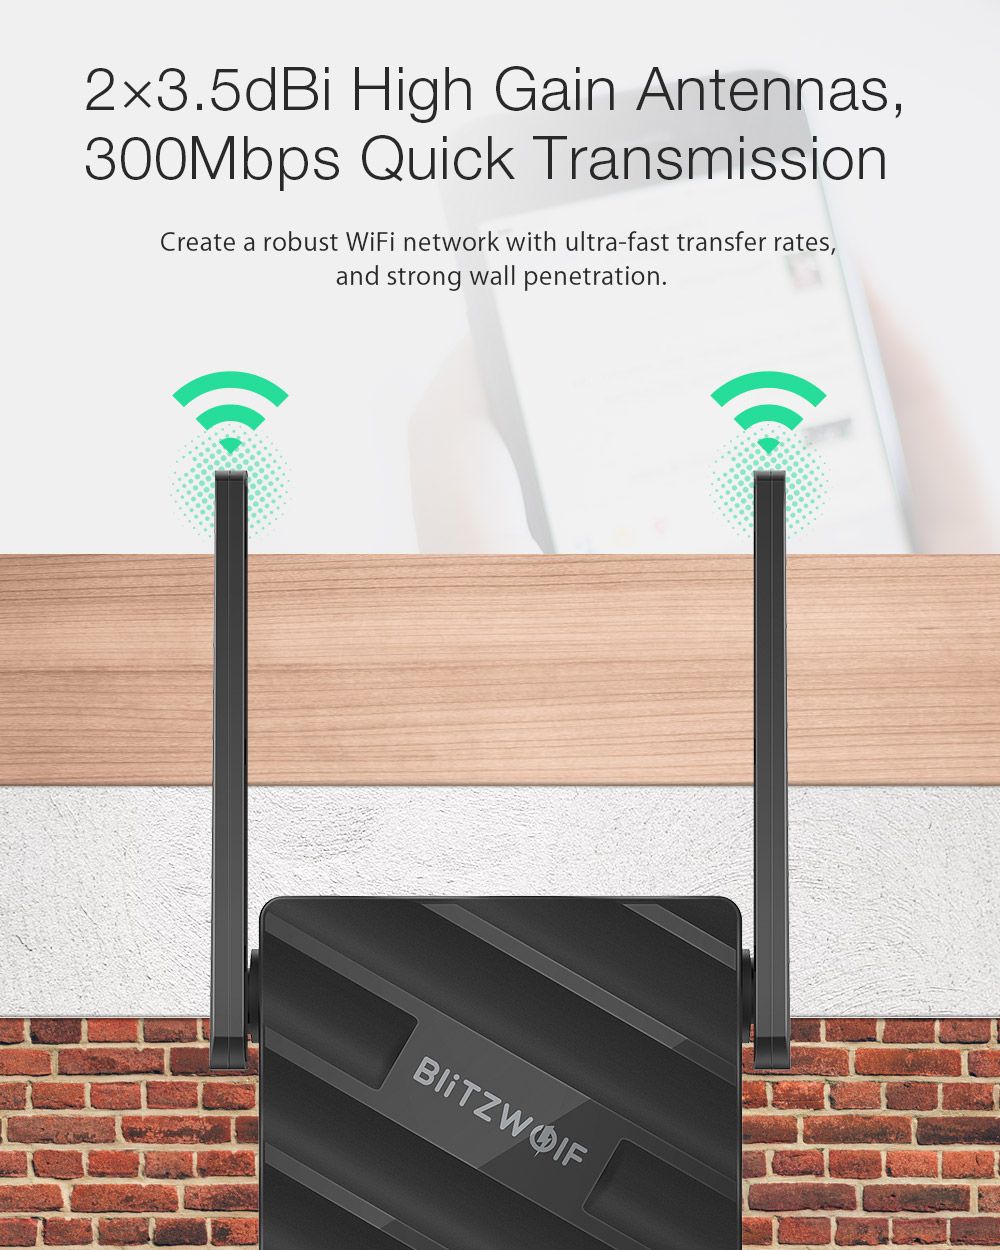 BlitzWolfreg-BW-NET2-Wireless-Repeater-300Mbps-Wireless-Range-Extender-Supports-64-Devices-Portable--1707041